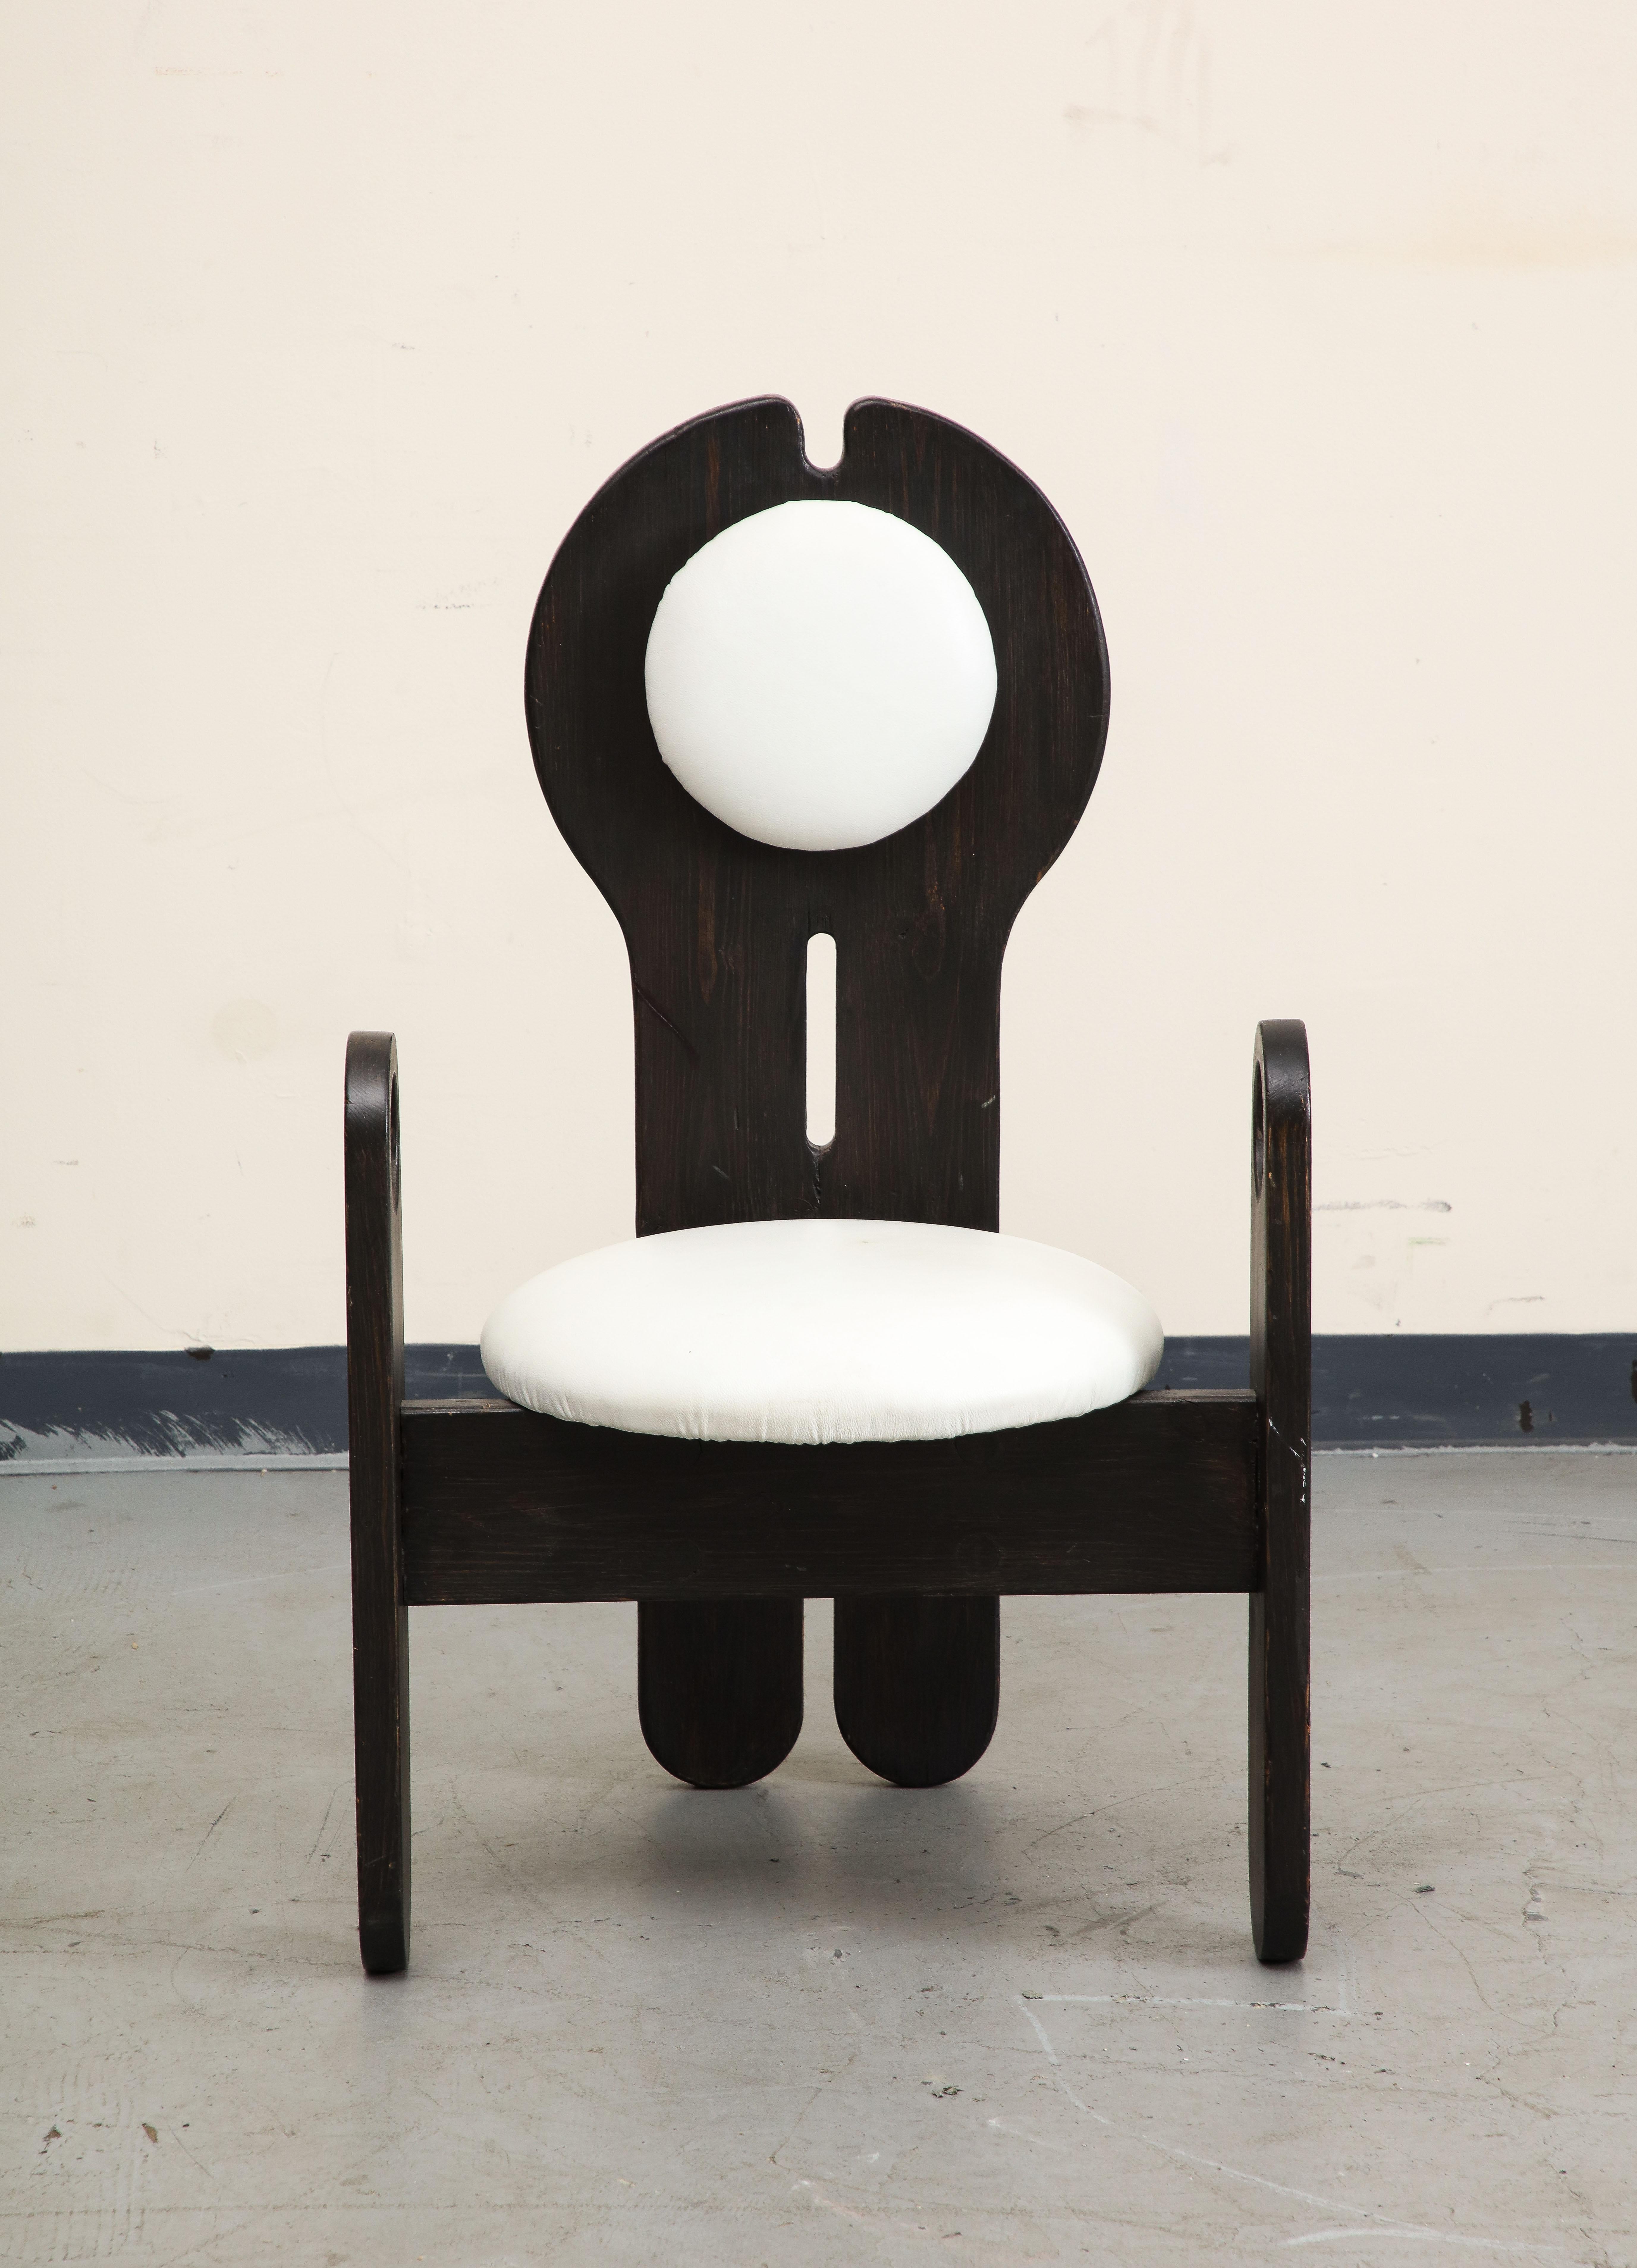 Hungarian studio side chair by Szedleczky Design, 1960s. Black painted wood frame in organic pistil-like shape with unique round arm rests. Headrest and seat upholstered in white leather.